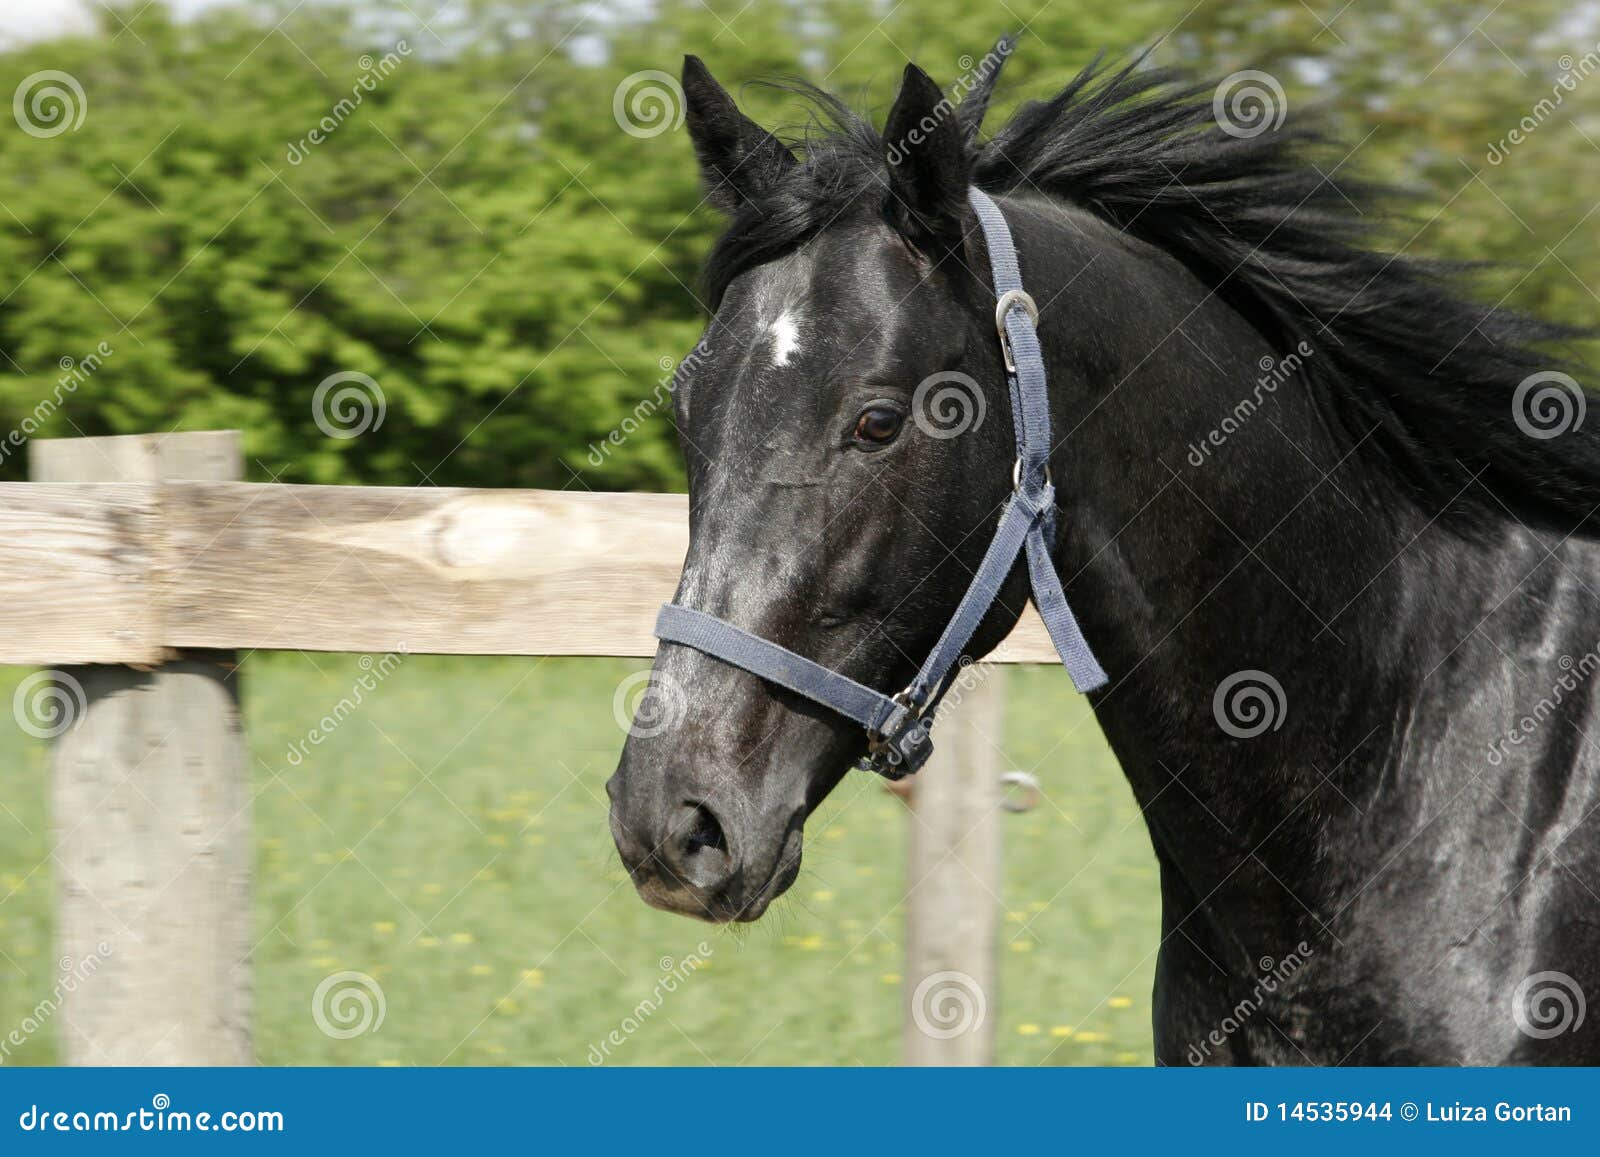 thoroughbred horse 2 year old racing stallion